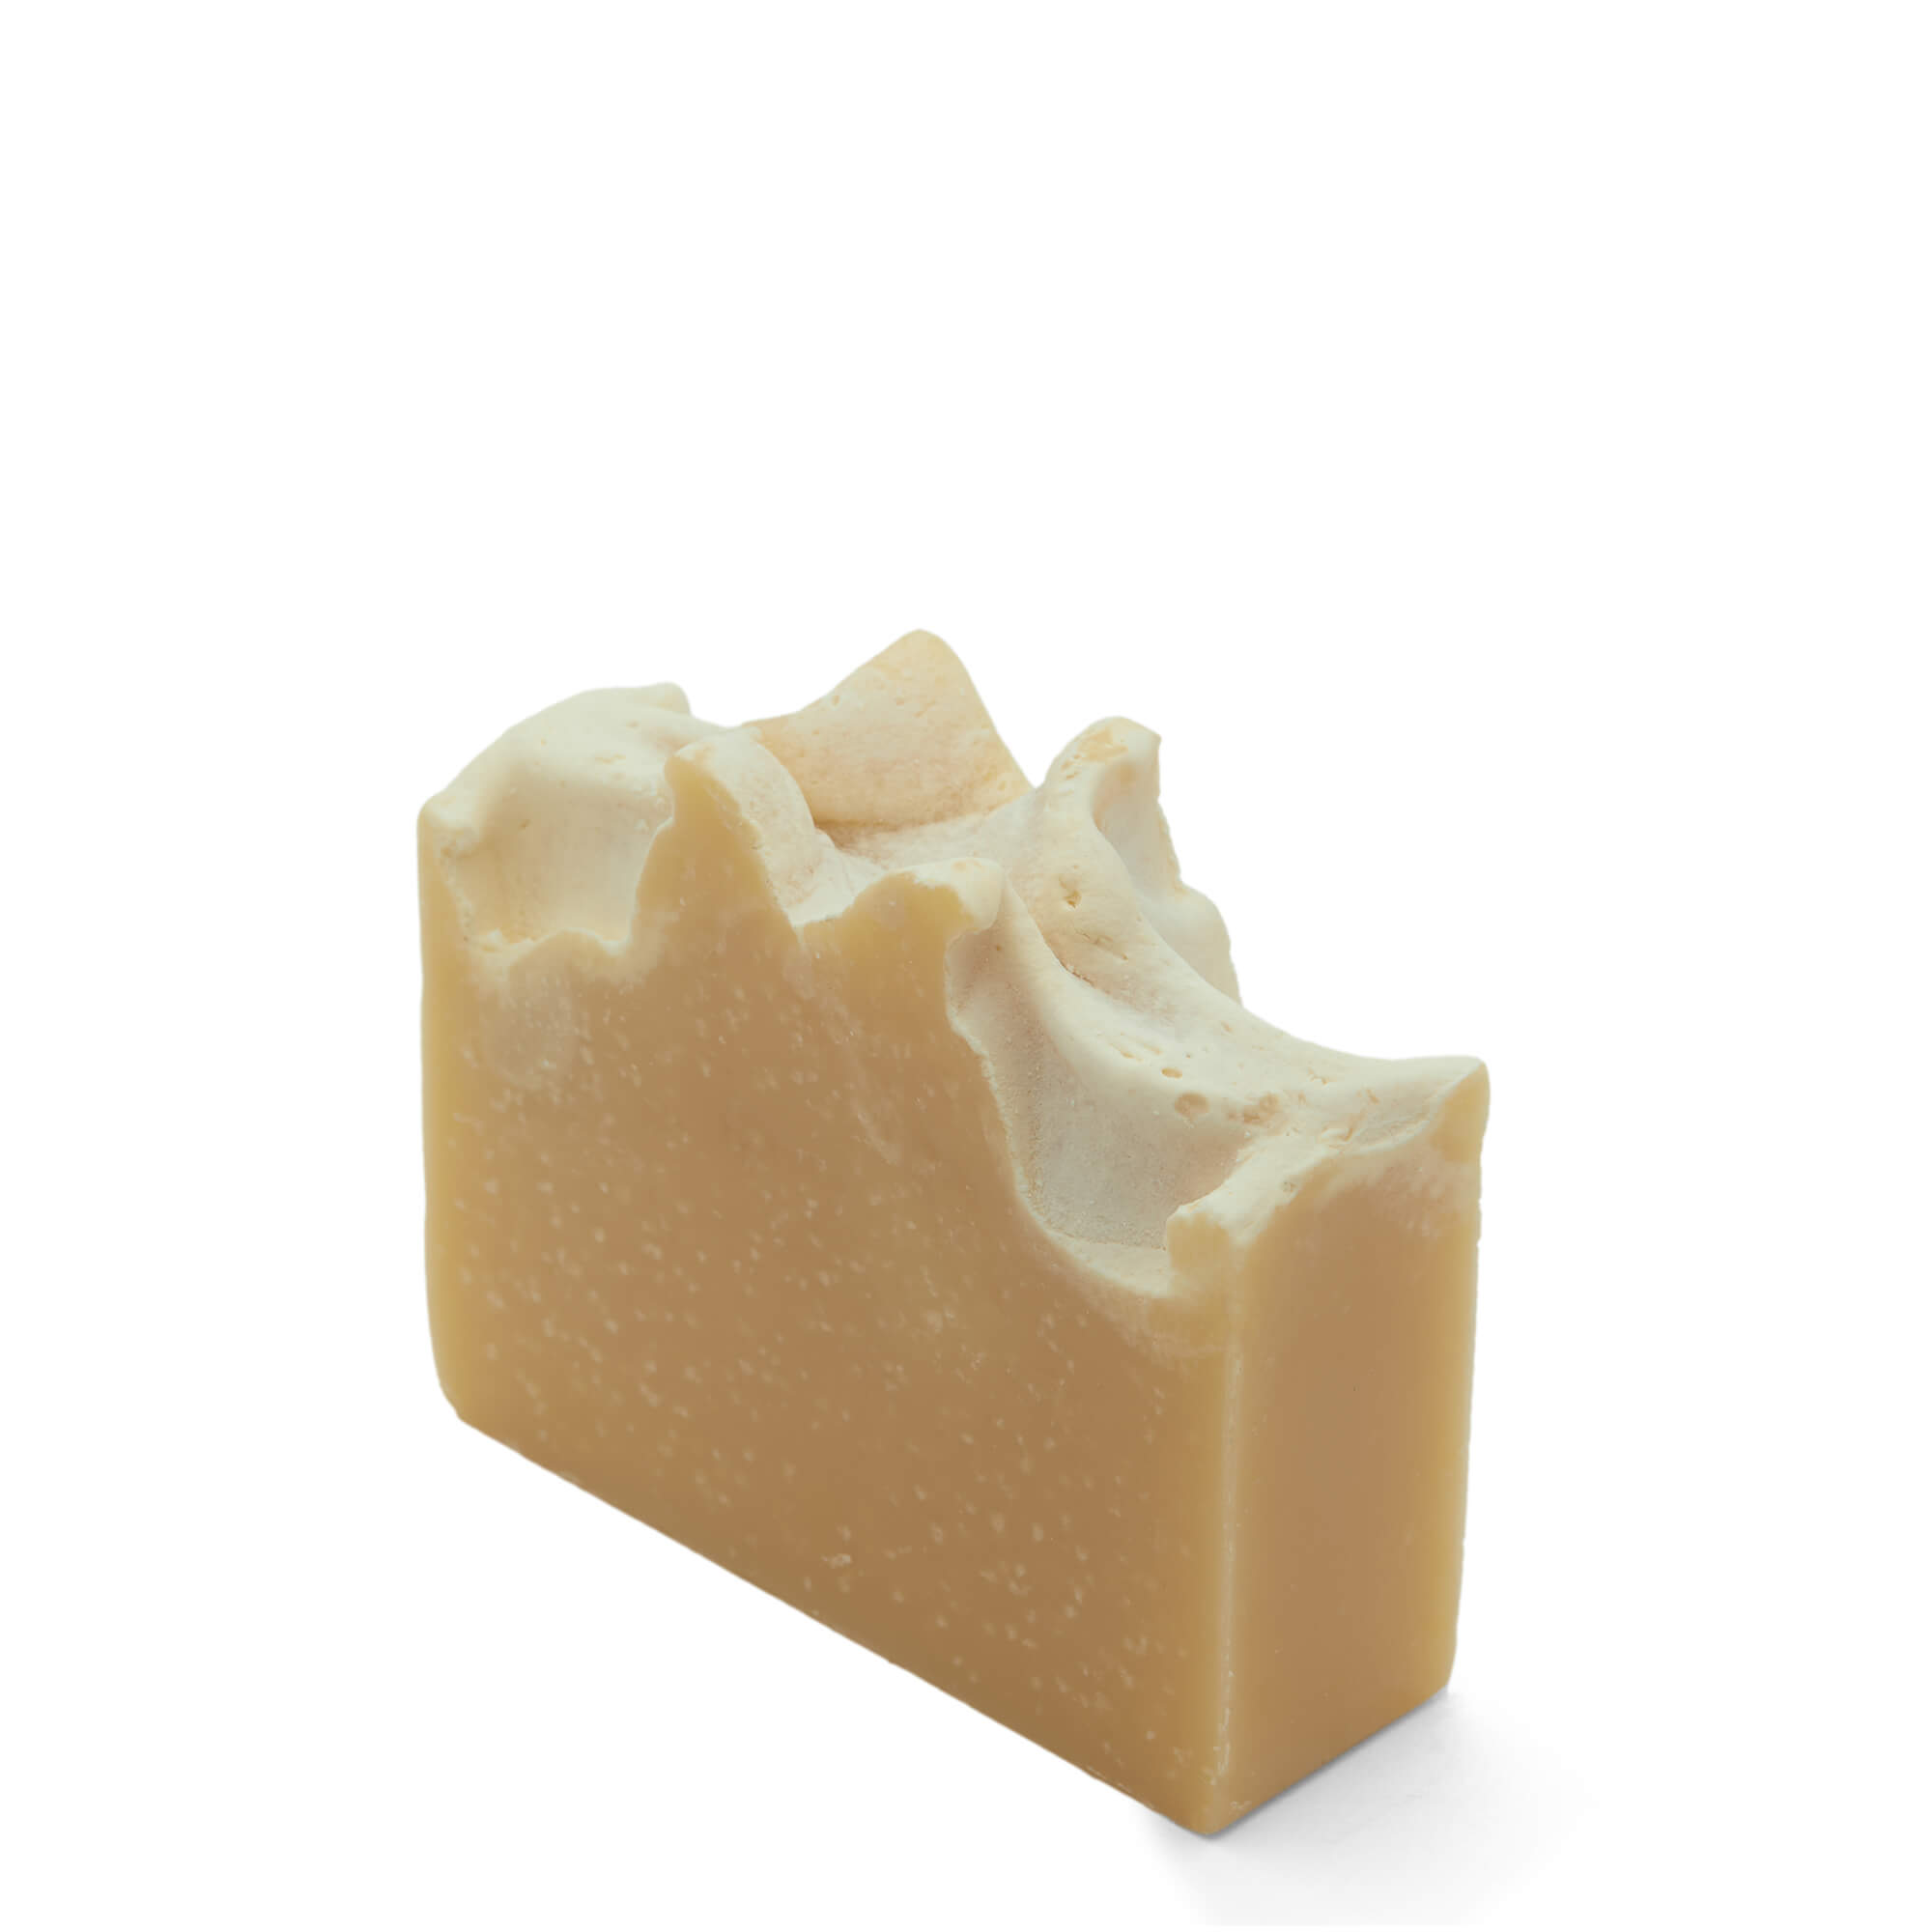 Solid soap - Carrots, Pomegranate & Buckthorn